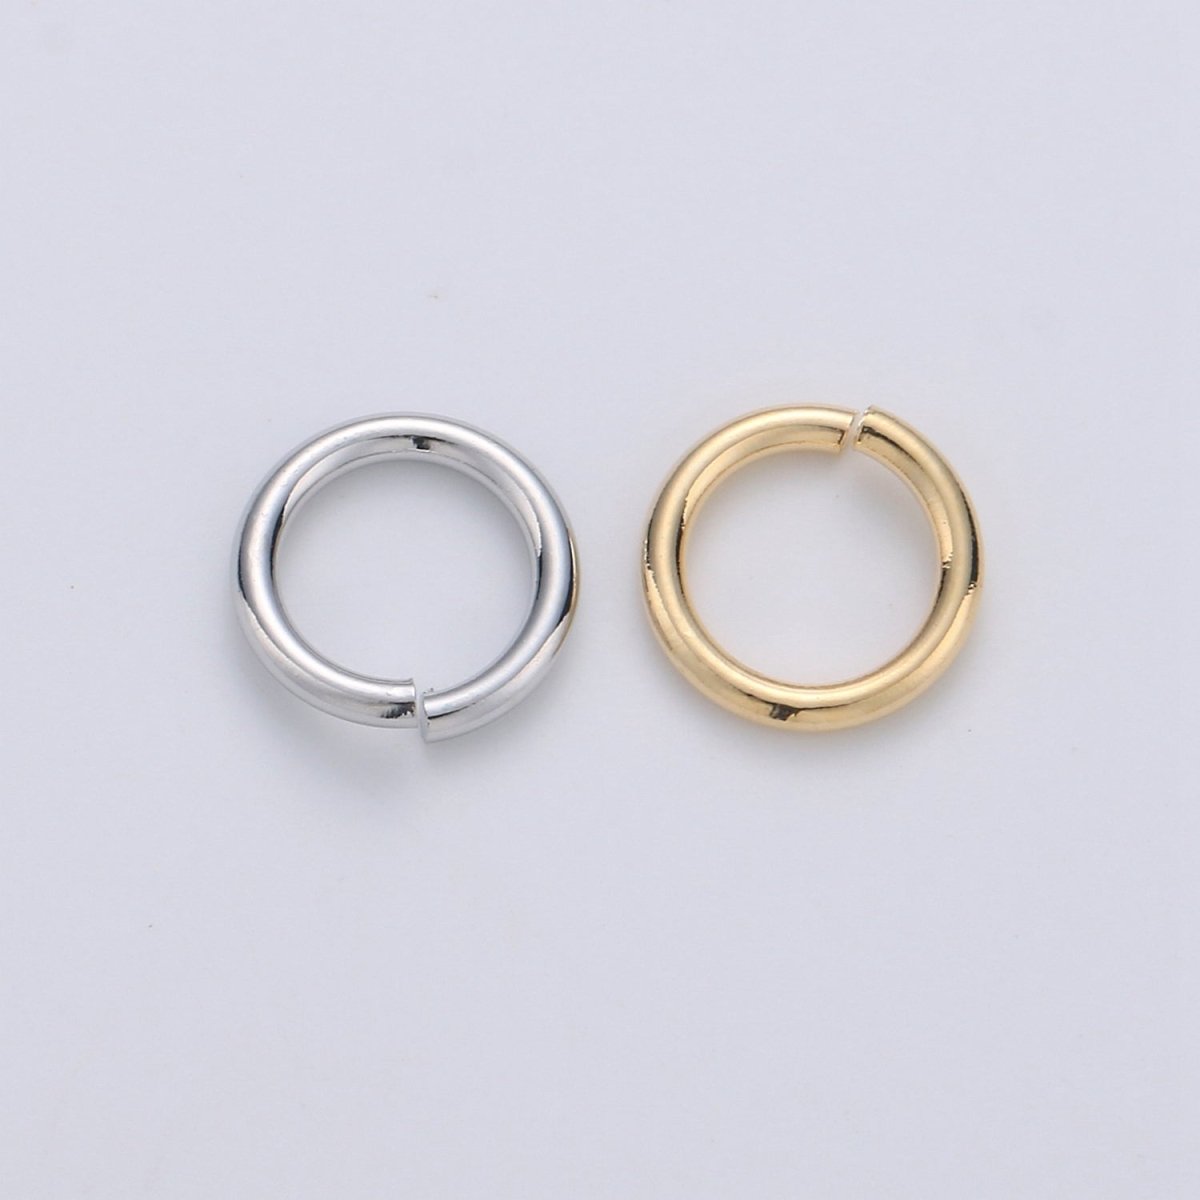 Open Jump Ring Real Gold Plated Jump Ring 5mm 6mm 7mm 8mm 10mm with 18 gauge / 1mm thickness for Jewelry Supply Component 10gram O-024 O-032 ~ O-037 - DLUXCA